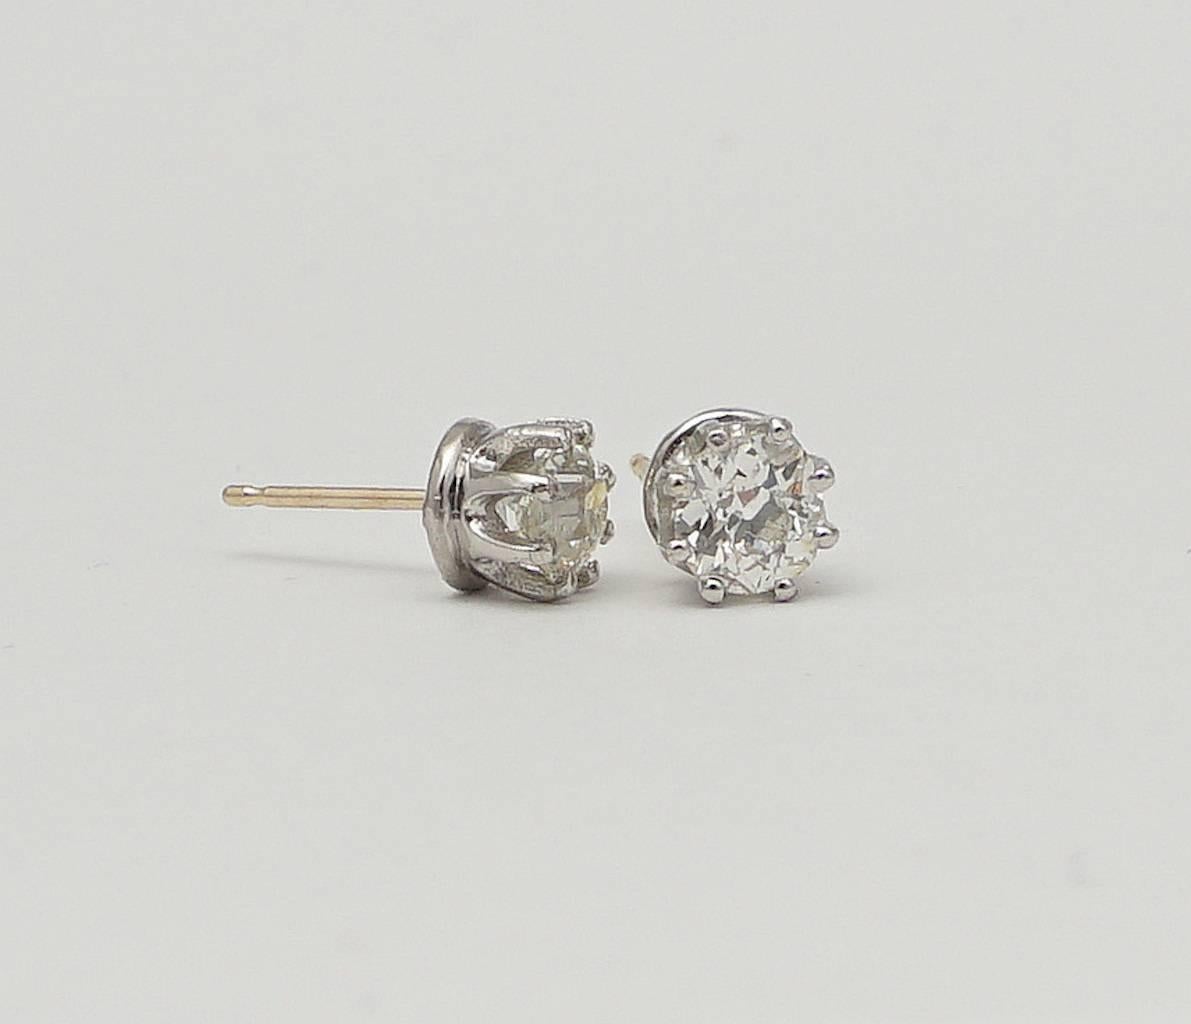 A pair of beautiful diamond stud earrings in luxurious platinum. Centered by a pair of beautifully matched antique old European cut diamonds, these earrings feature traditional Tiffany style mountings handcrafted in platinum.

Grading as beautiful